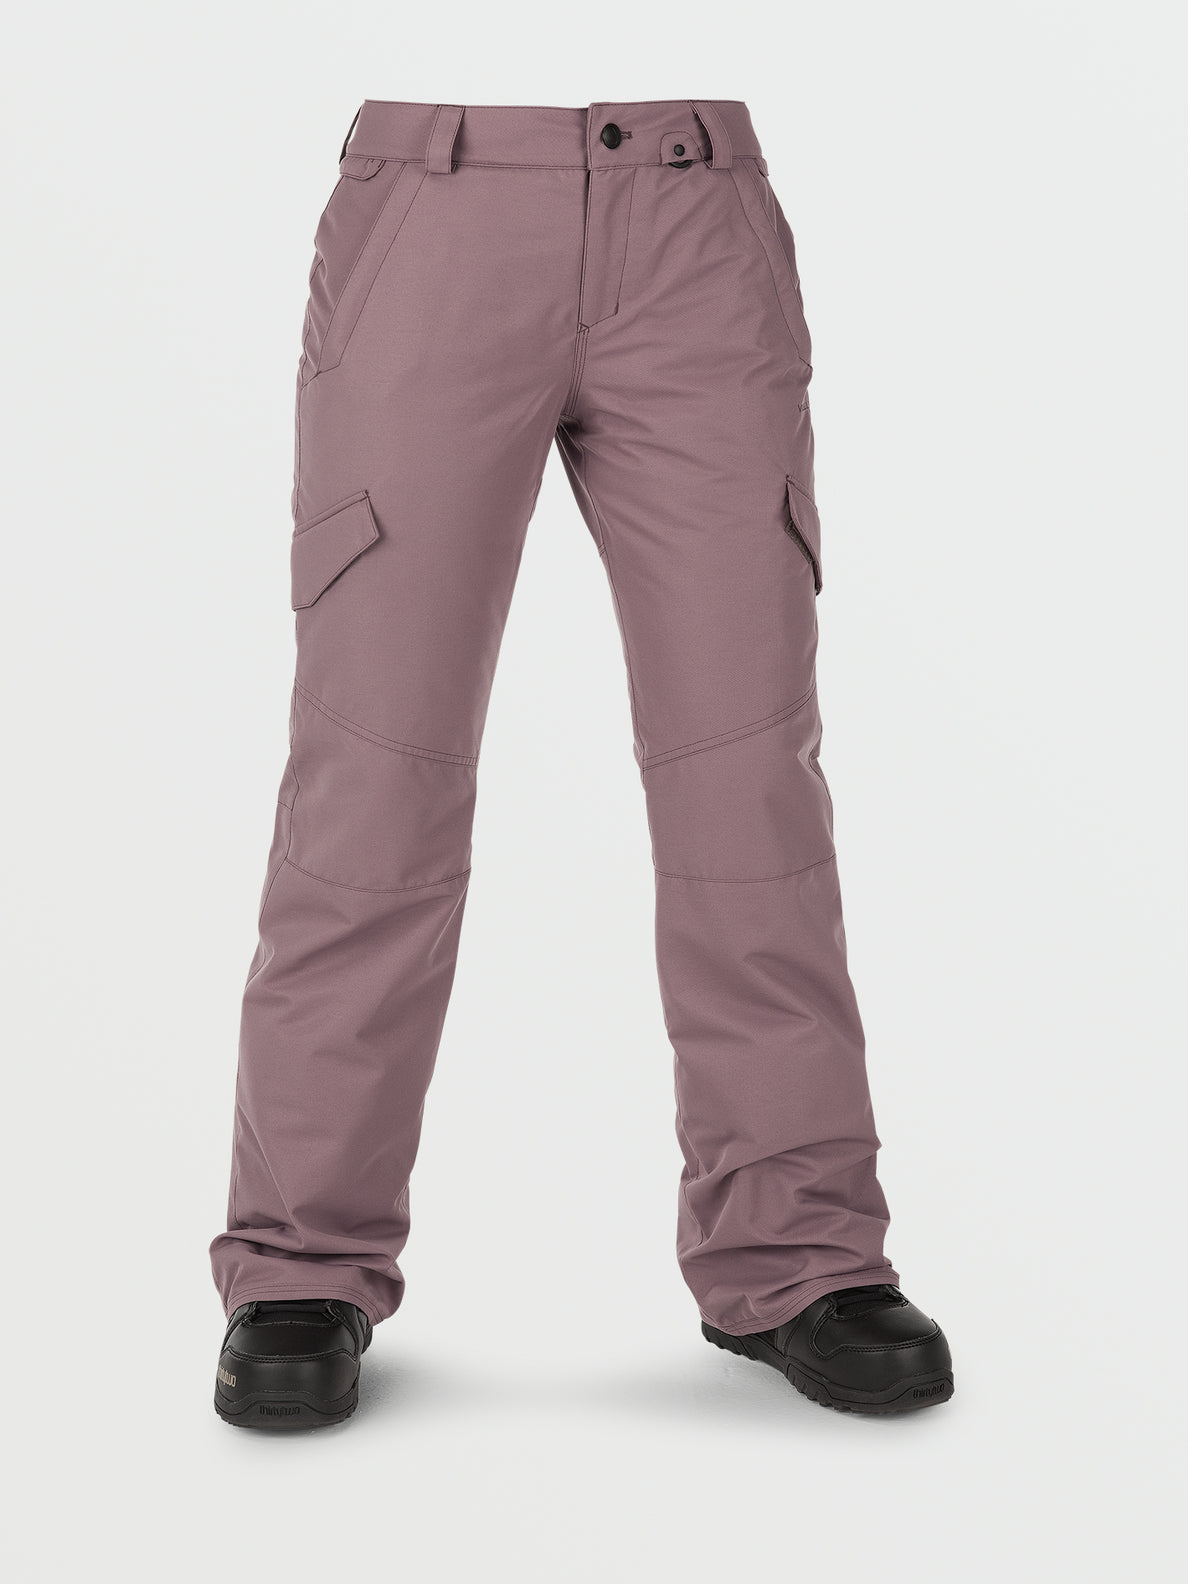 Womens Bridger Insulated Pants - Rosewood (H1252302_ROS) [4]